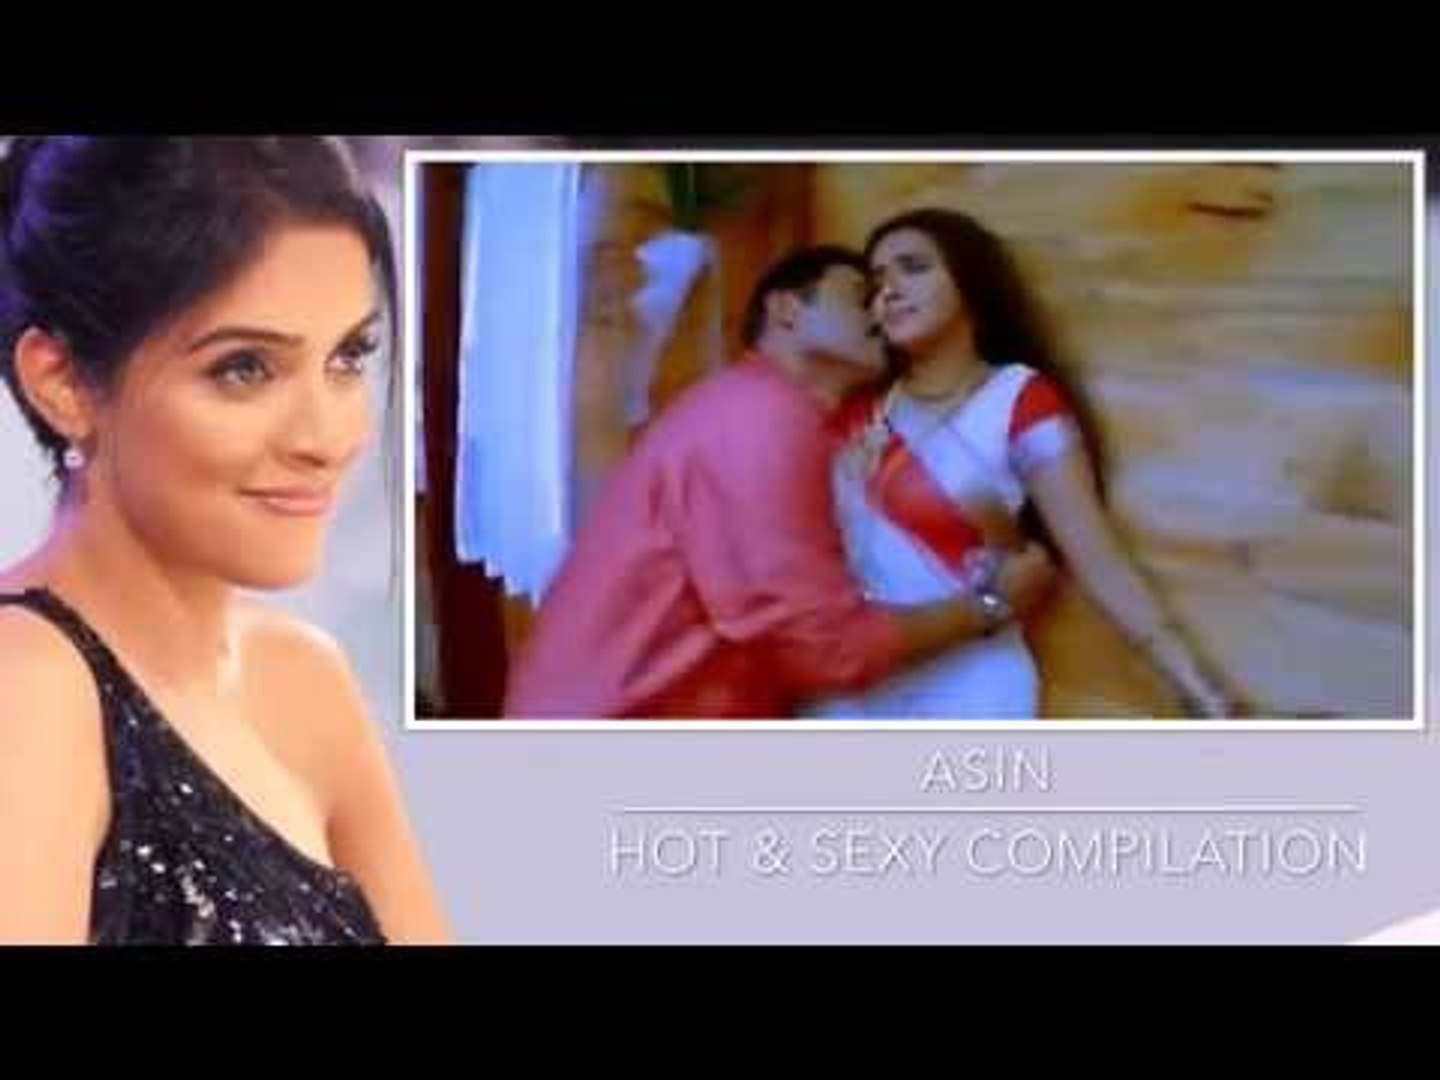 Asin Hot & Sexy Compilation HD - video Dailymotion